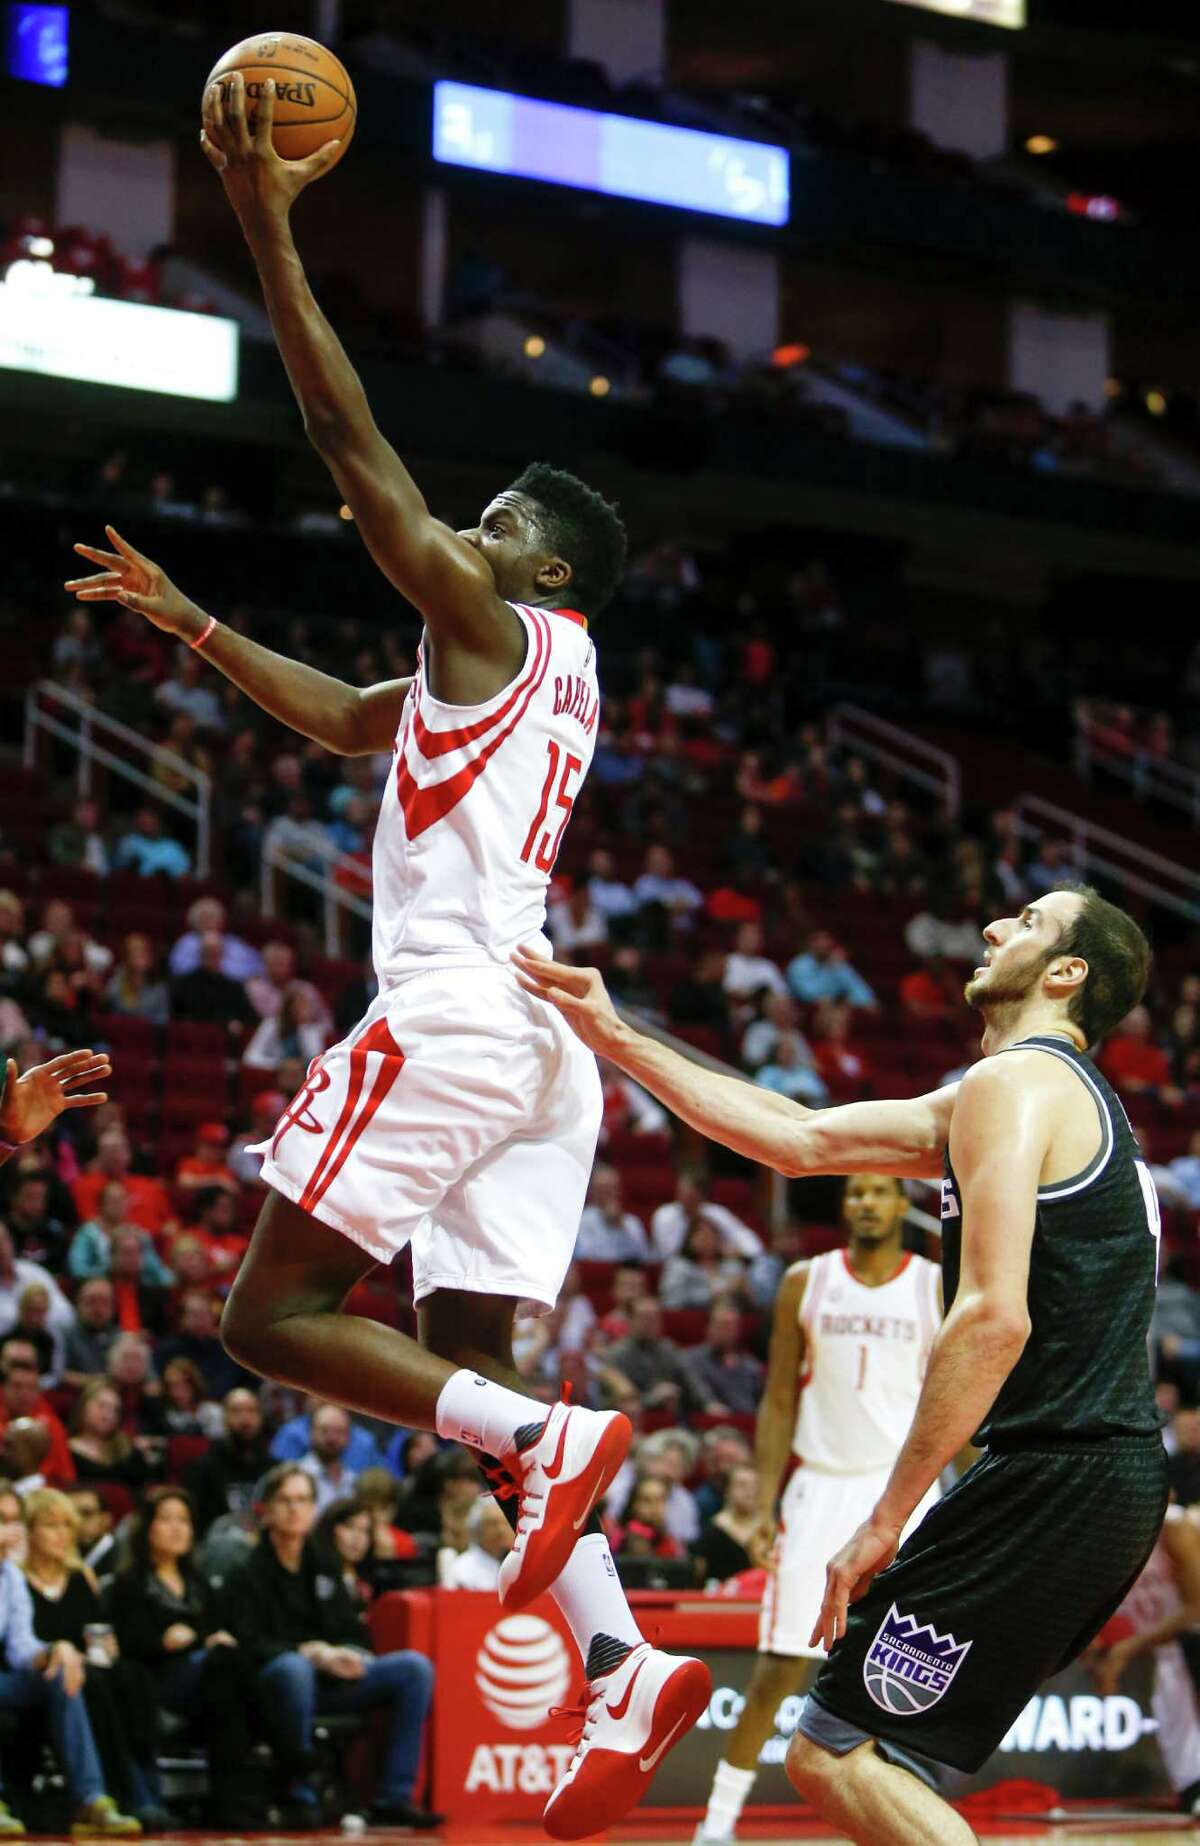 Clint Capela eager to get back on court for Rockets